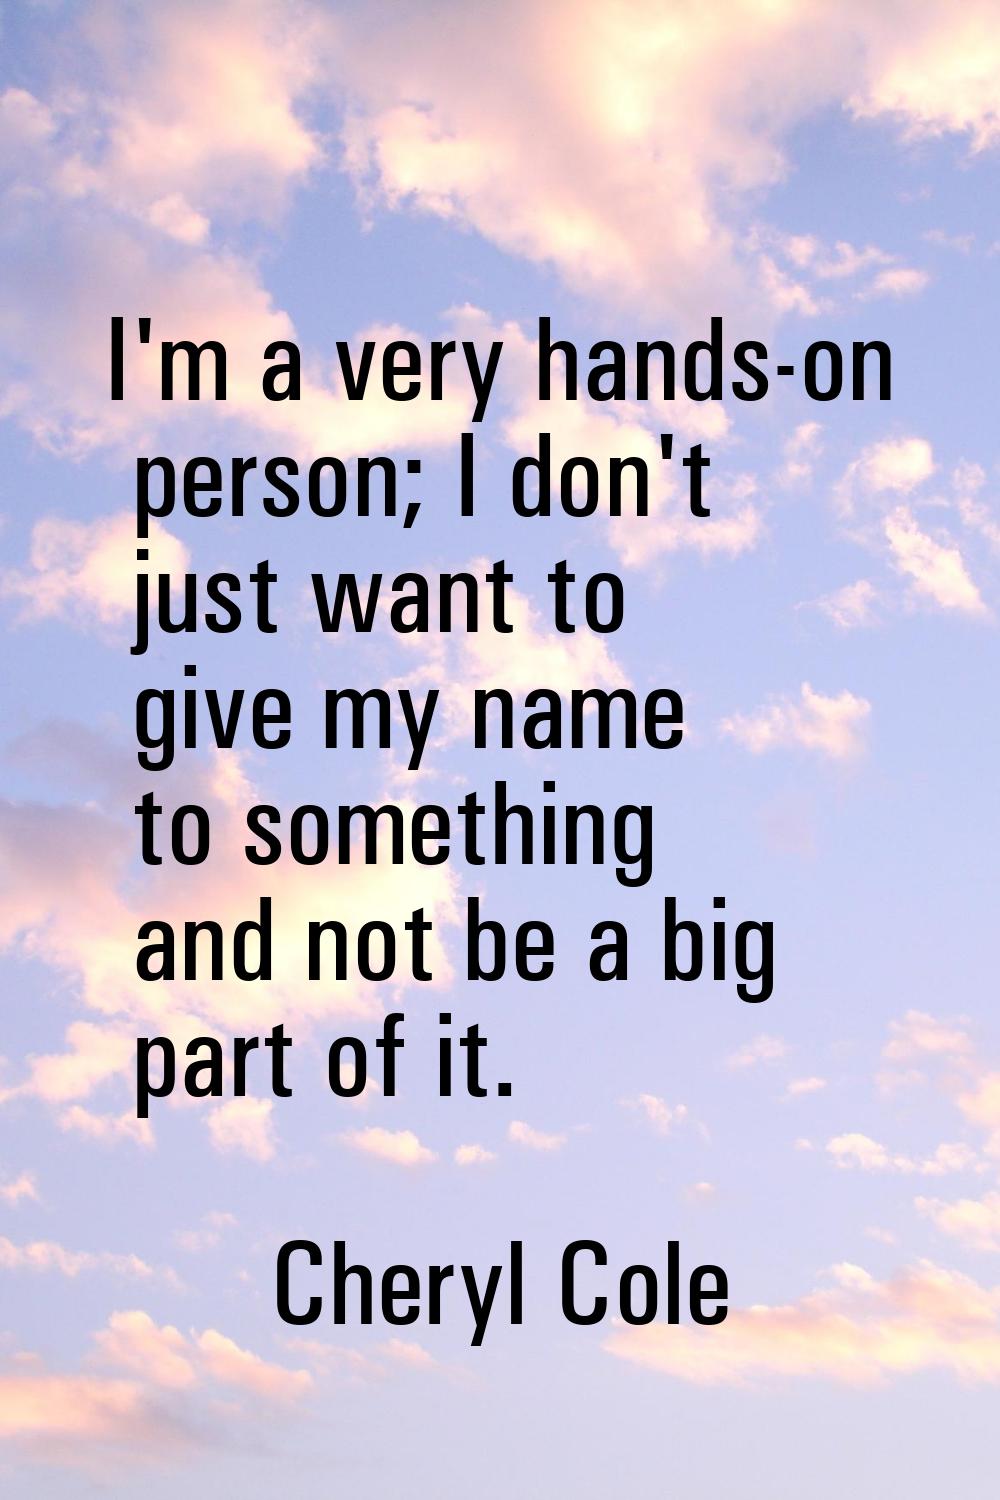 I'm a very hands-on person; I don't just want to give my name to something and not be a big part of